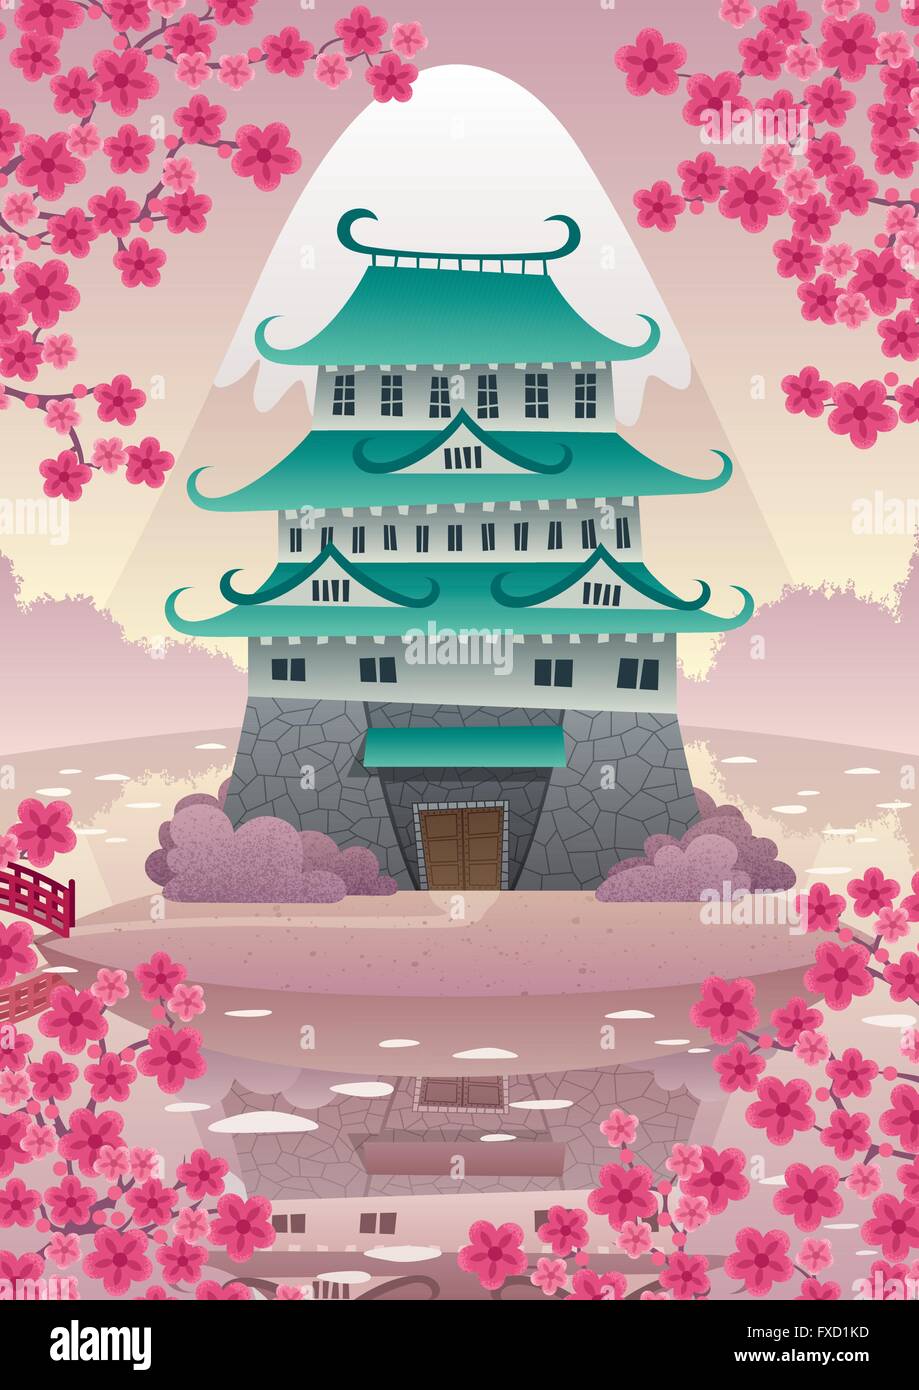 Cartoon Japanese castle. No transparency used. Basic (linear) gradients. Stock Vector